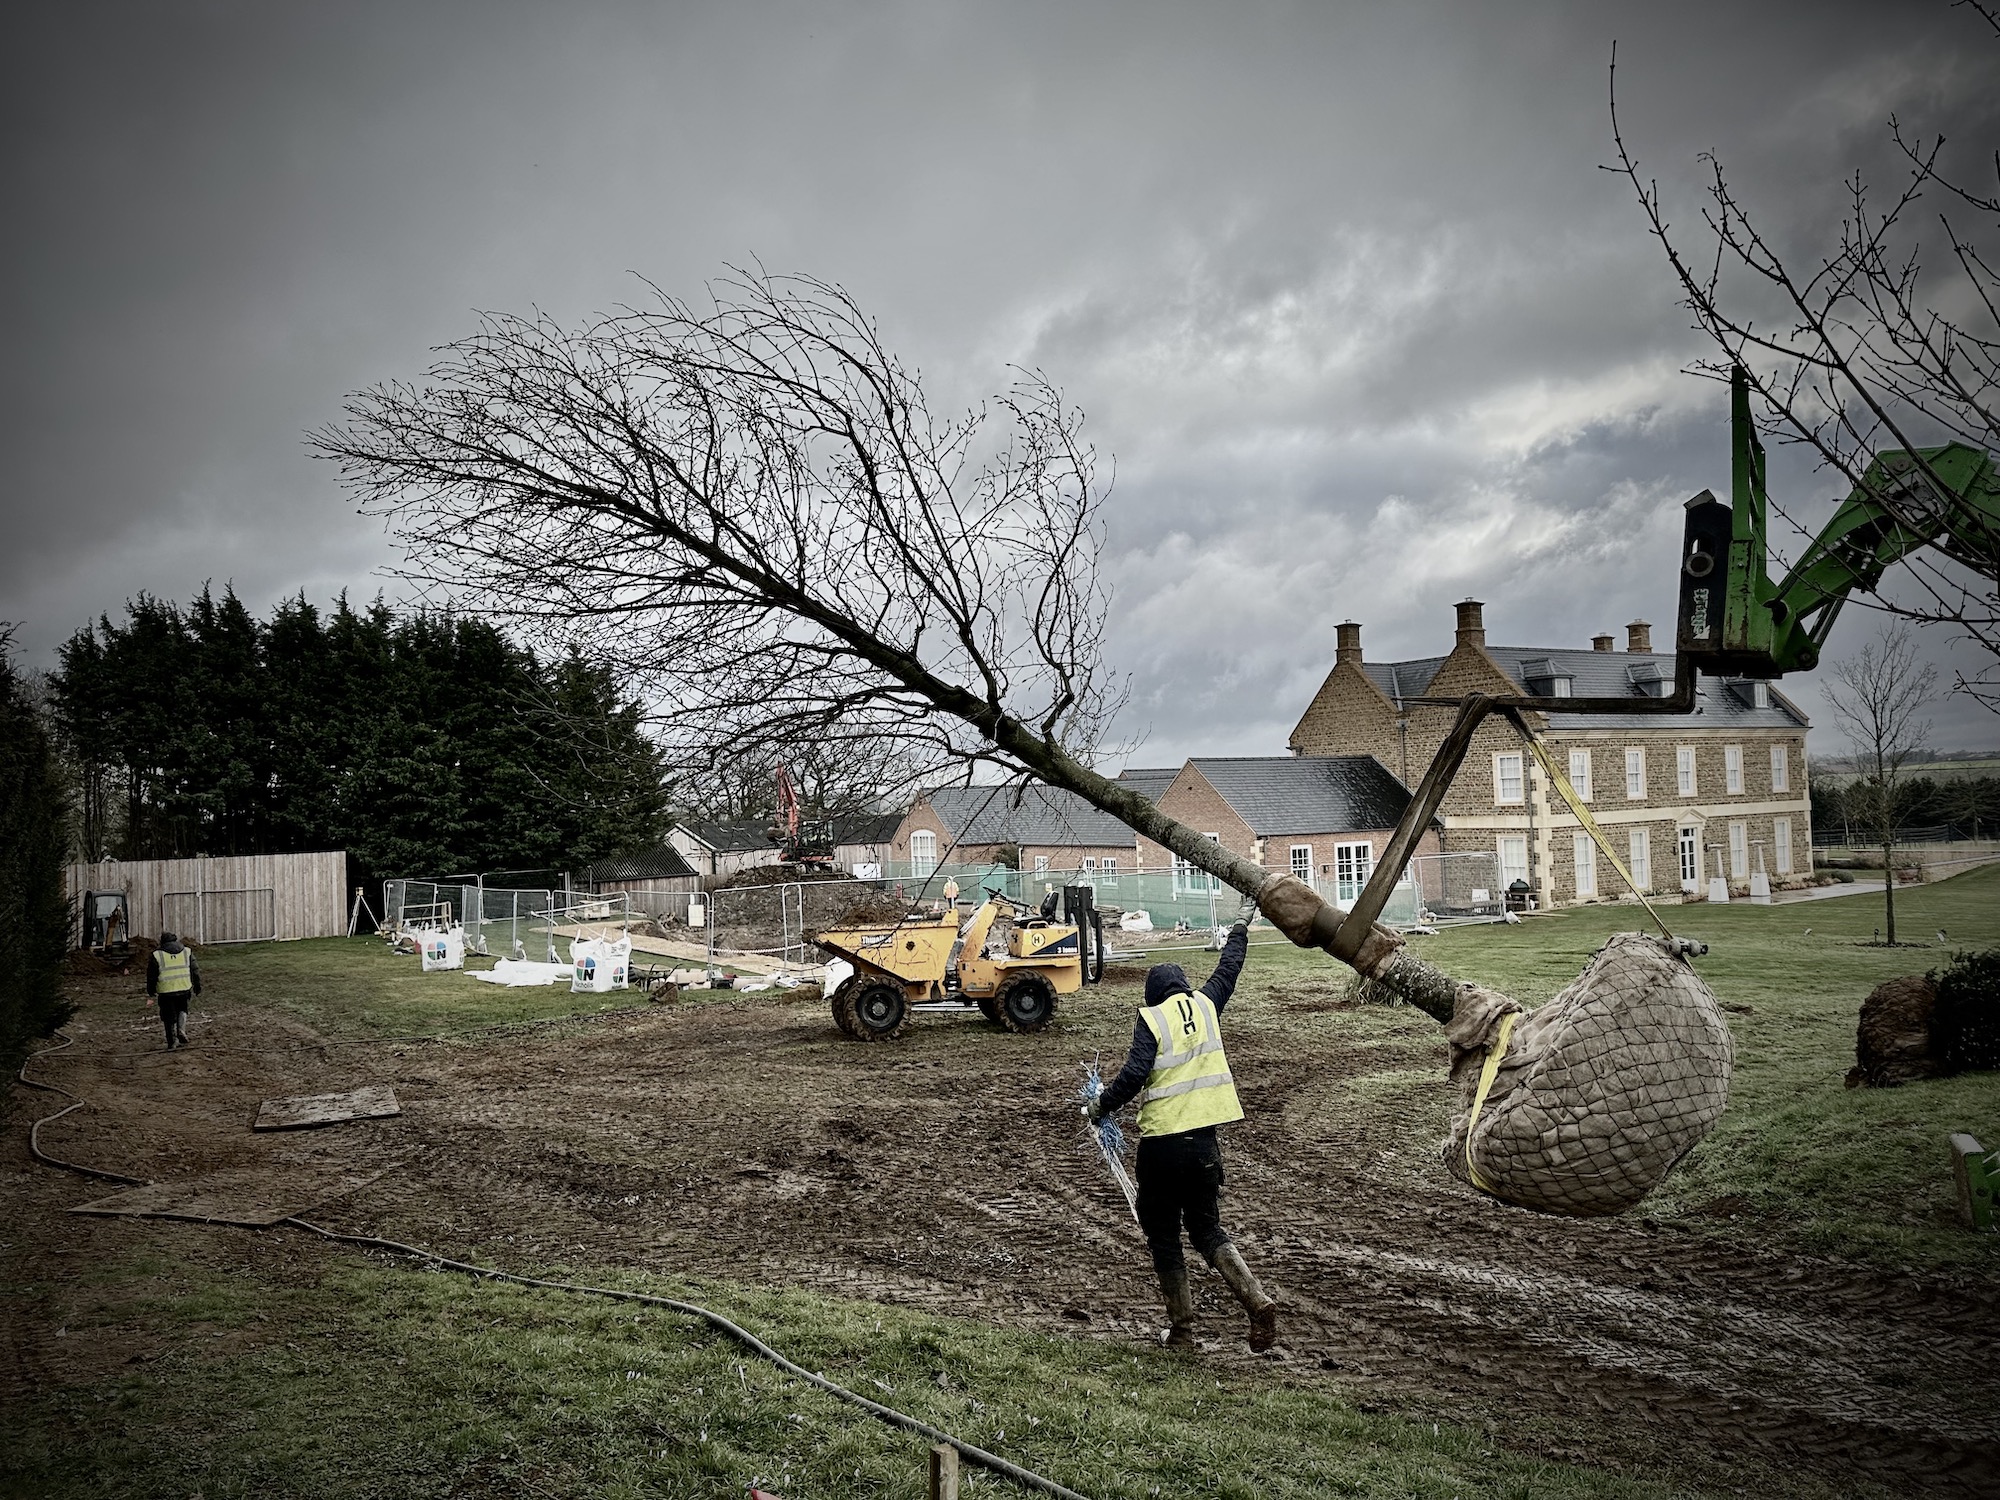 Large Magnolia tree being lifted by a digger across a muddy site at Sibford Park